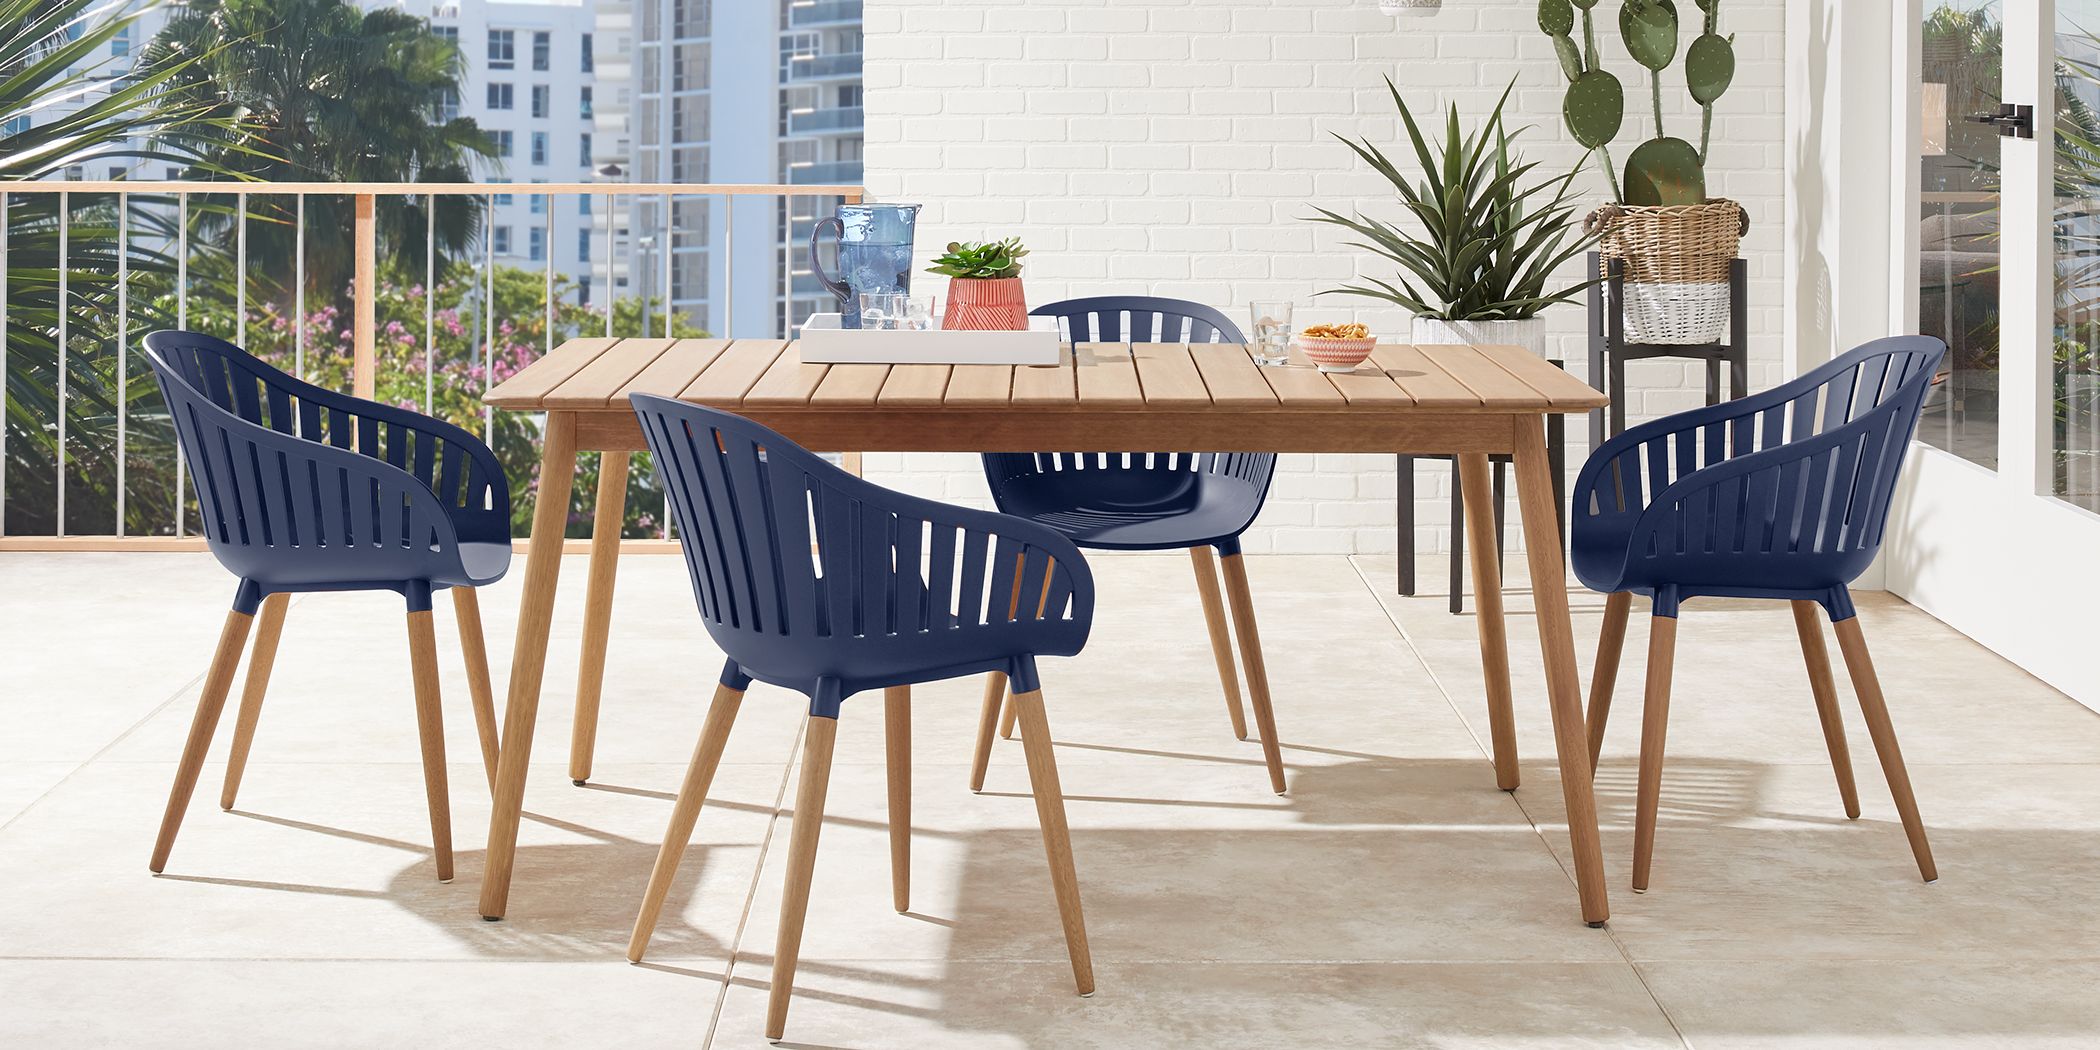 5 Piece Patio Dining Sets For Under 1000